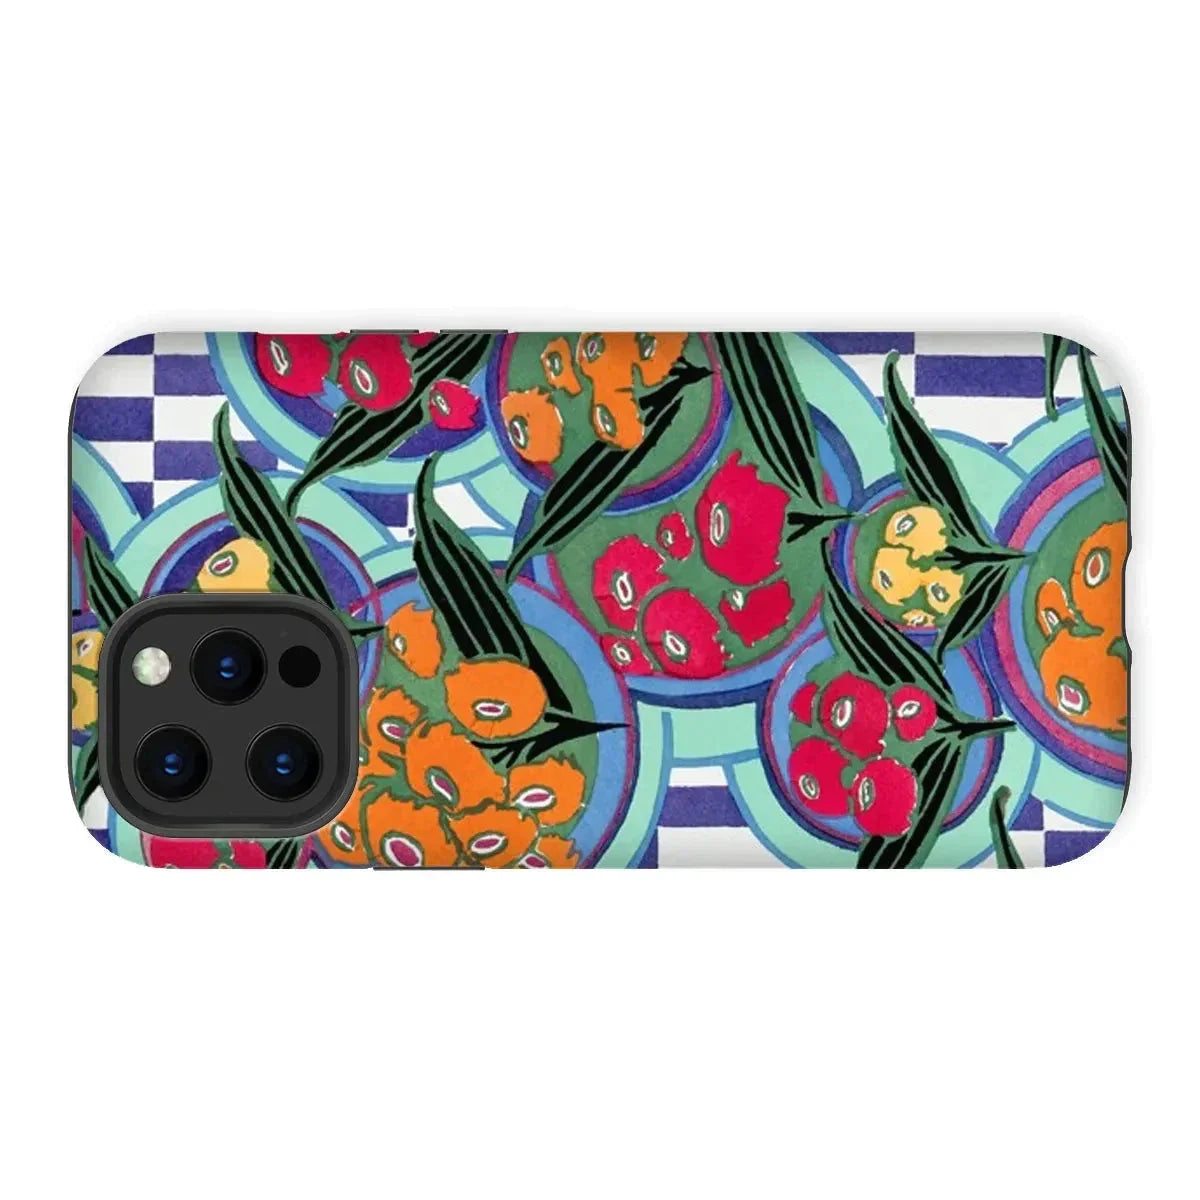 French Art Phone Cases